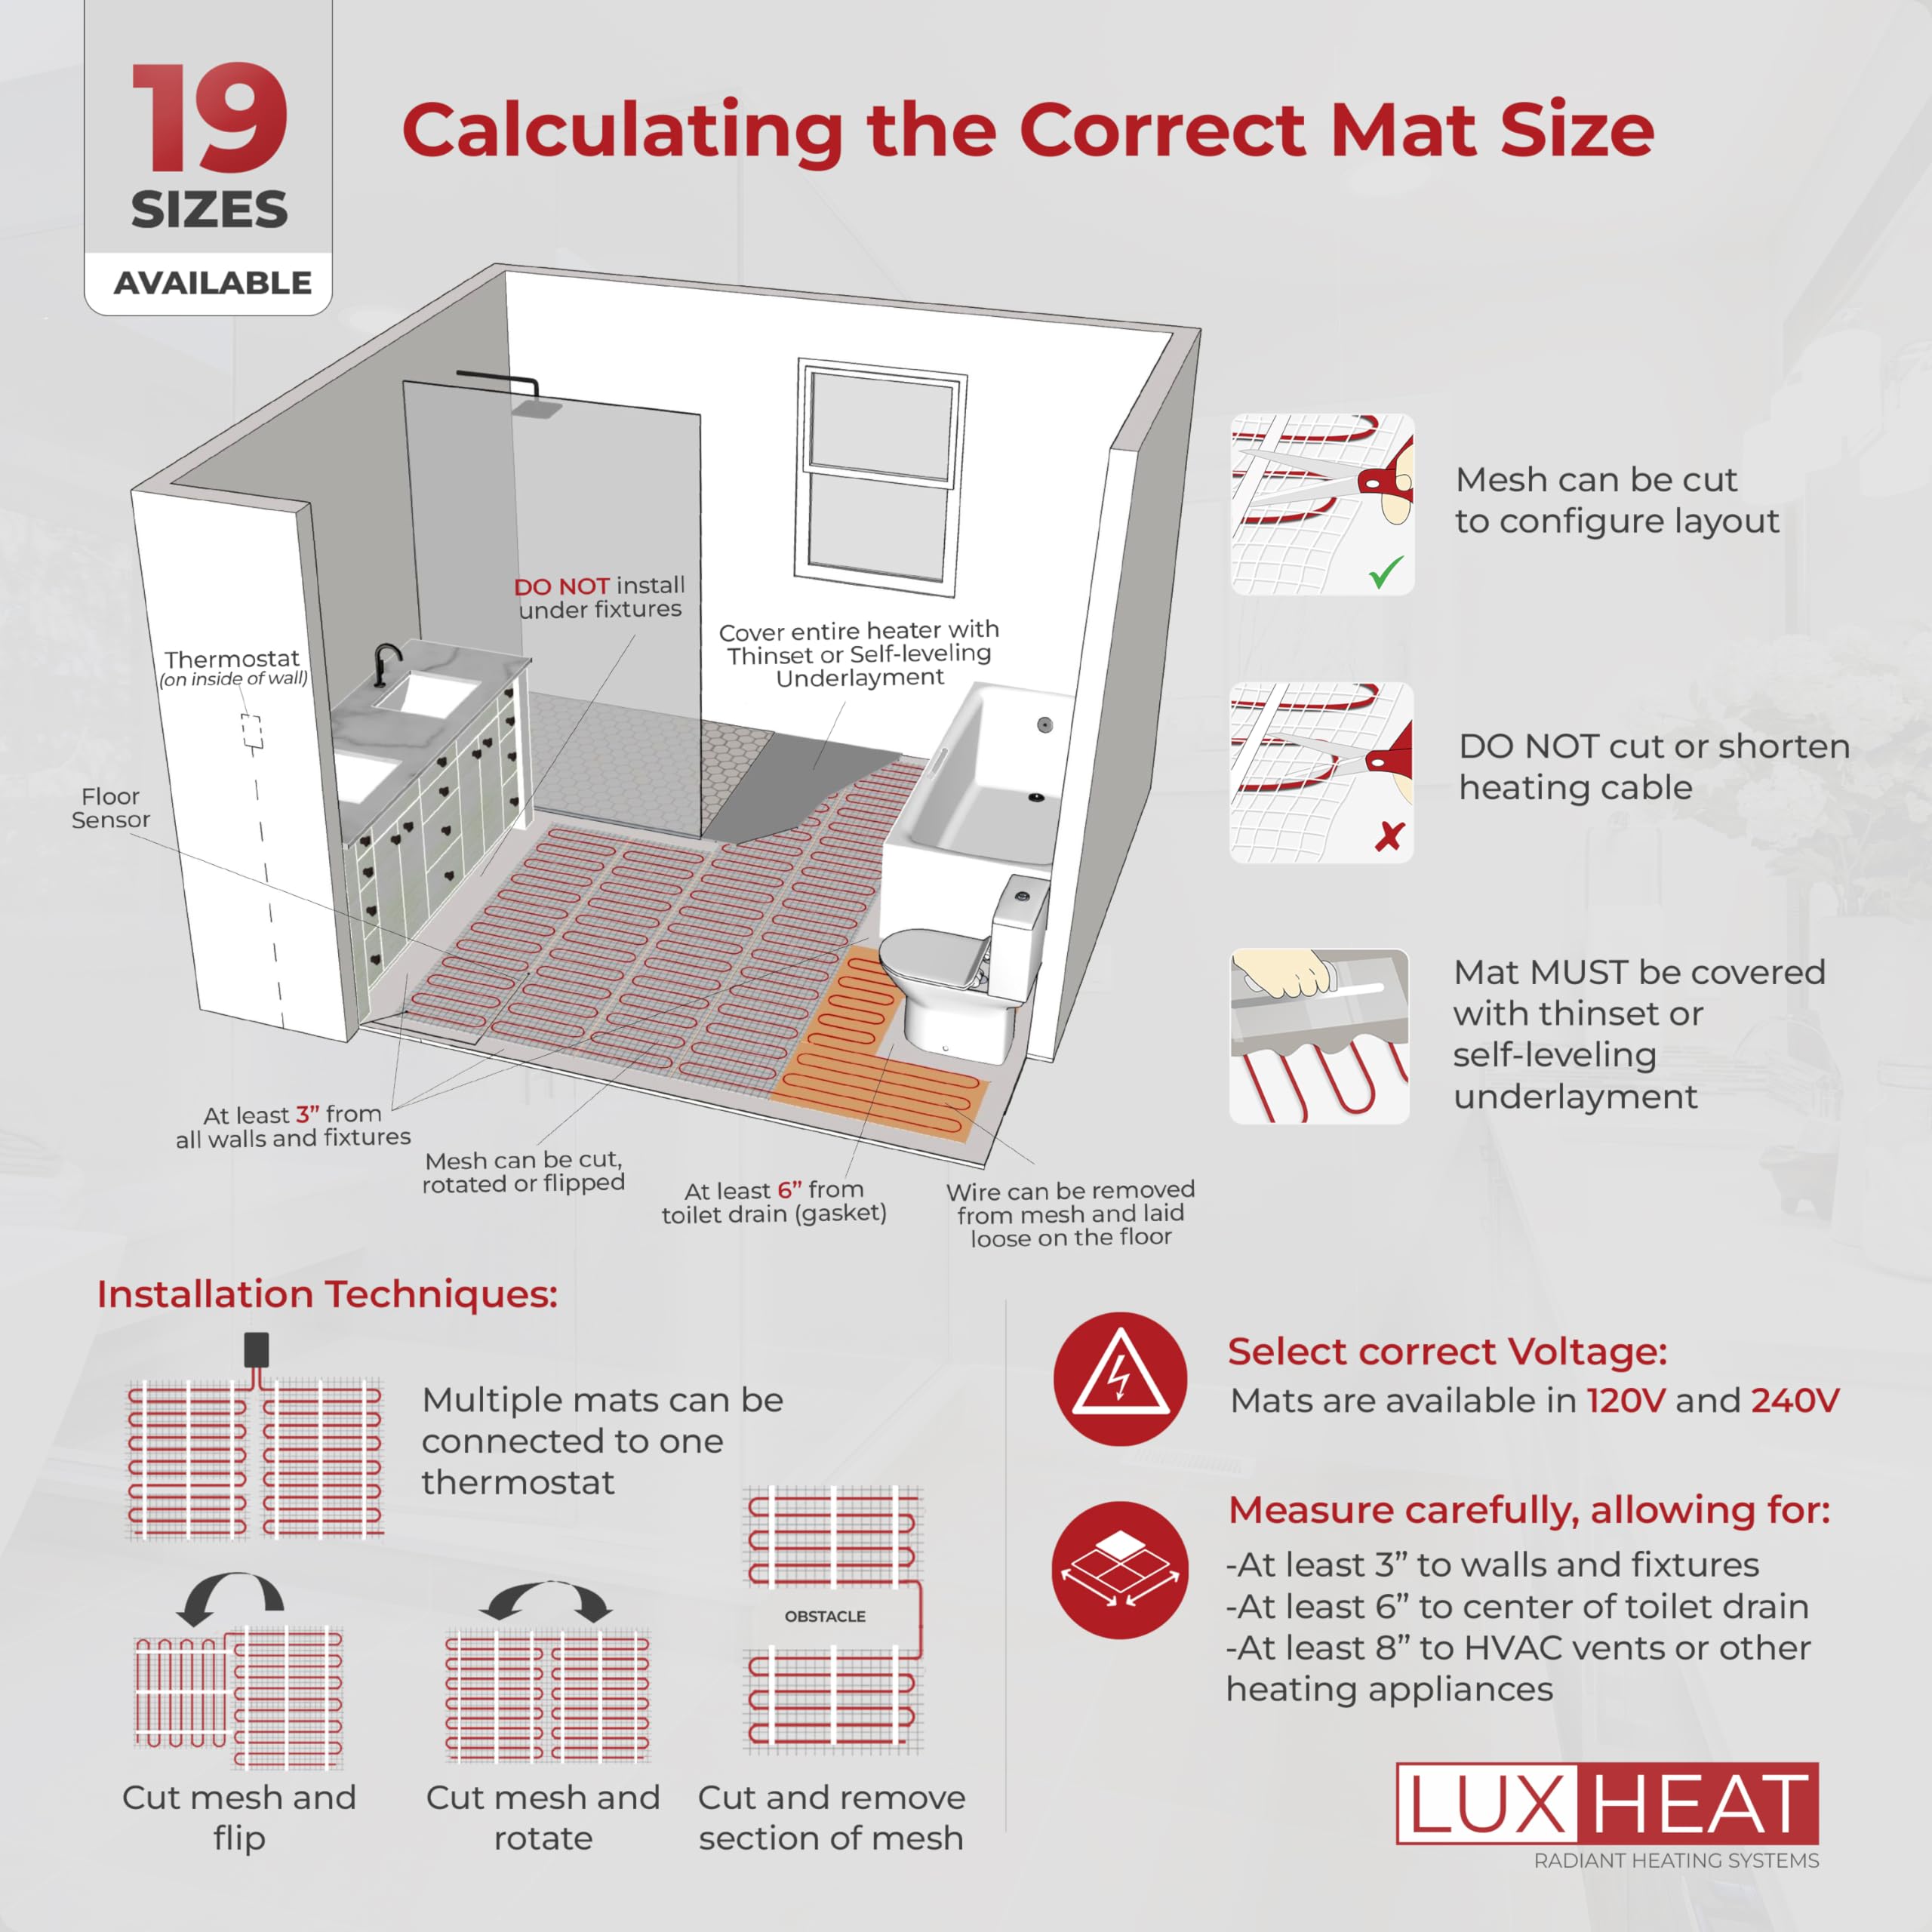 LuxHeat 20 Sqft Mat Kit, 120v Electric Radiant Floor Heating System for Under tile, Stone and Laminate. Kit Includes Alarm, Heated Floor Mat, OJ Microline Programmable Thermostat with GFCI & Sensor